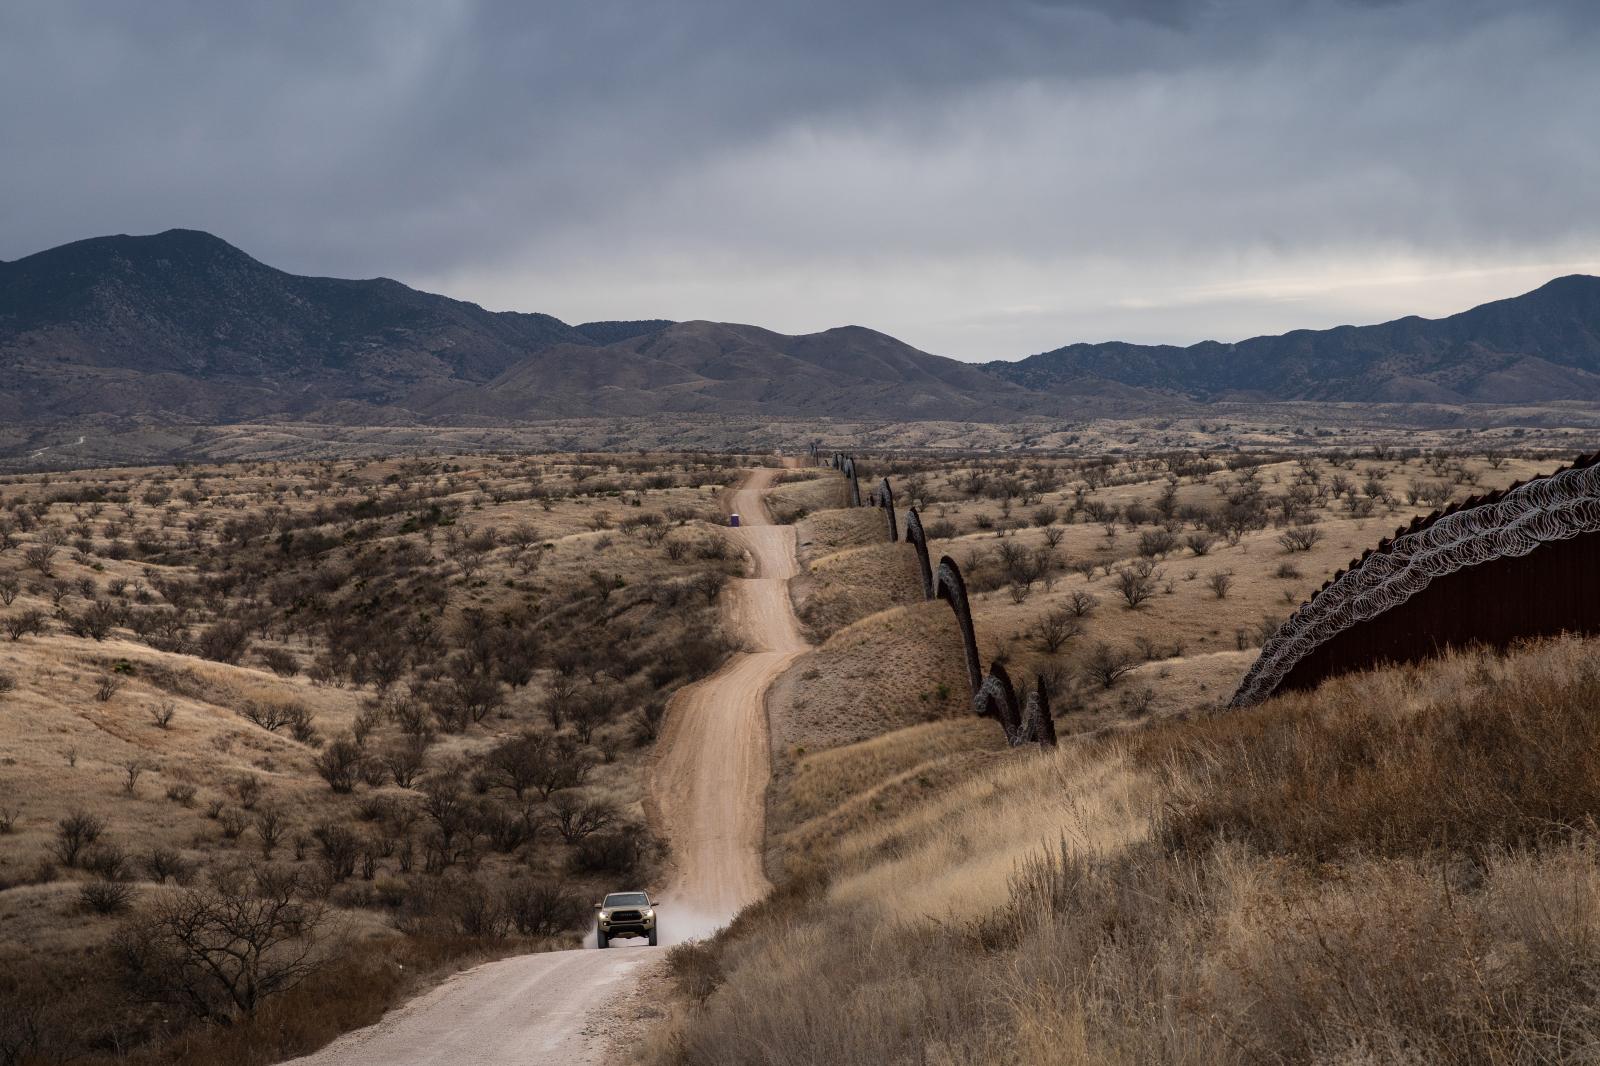 A truck speeds by the US border fence covered in concertina wire separating the US and Mexico, at the outskirts of Nogales, Arizona, on February 9, 2019.